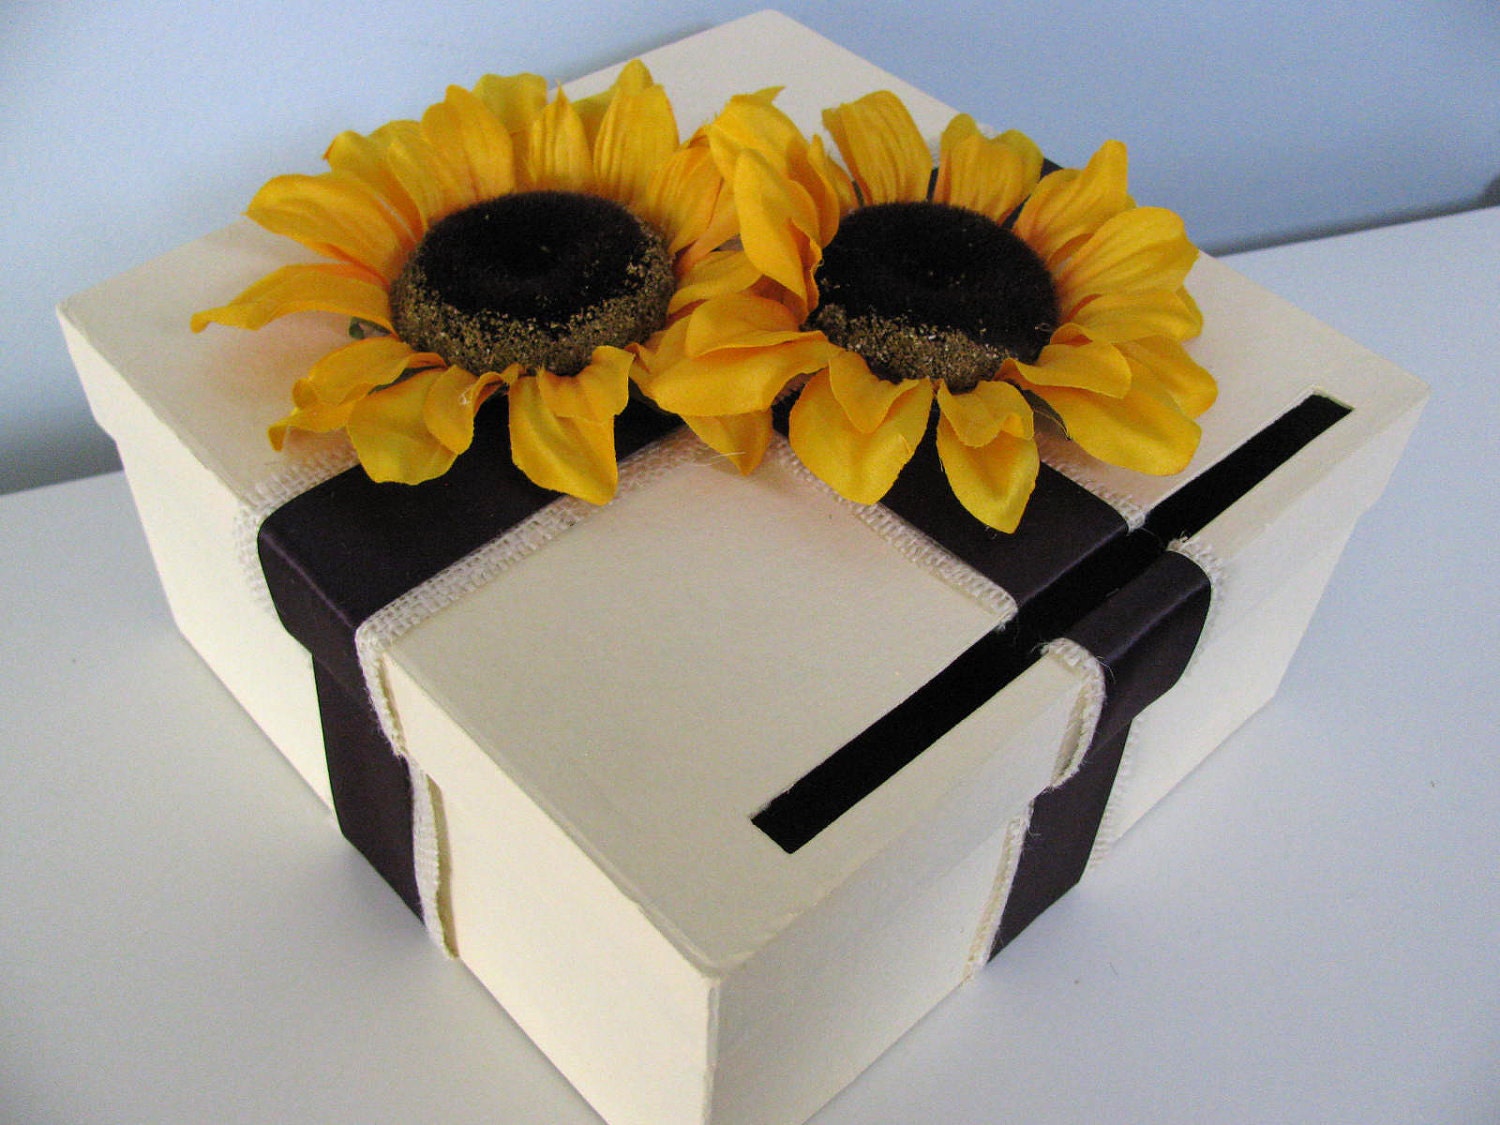 Can Customize Flowers and Colors - Ivory Wedding Card Box-Shown with layered Burlap, Eggplant Ribbon and Large Yellow Sunflowers